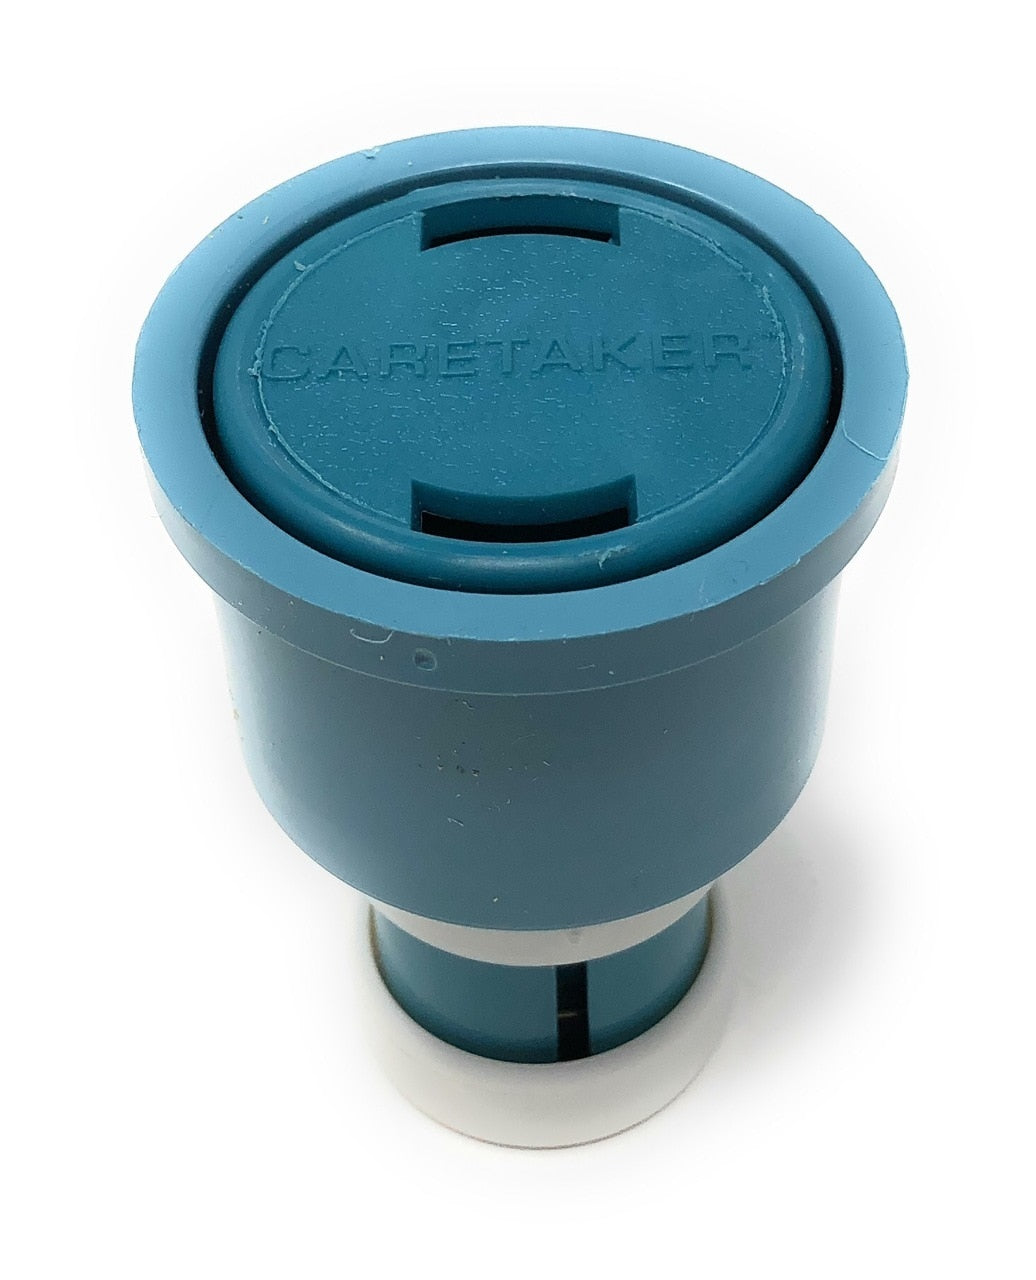 Caretaker 99 Complete 2" Cleaning Head (Tile Blue) - Fully Assembled